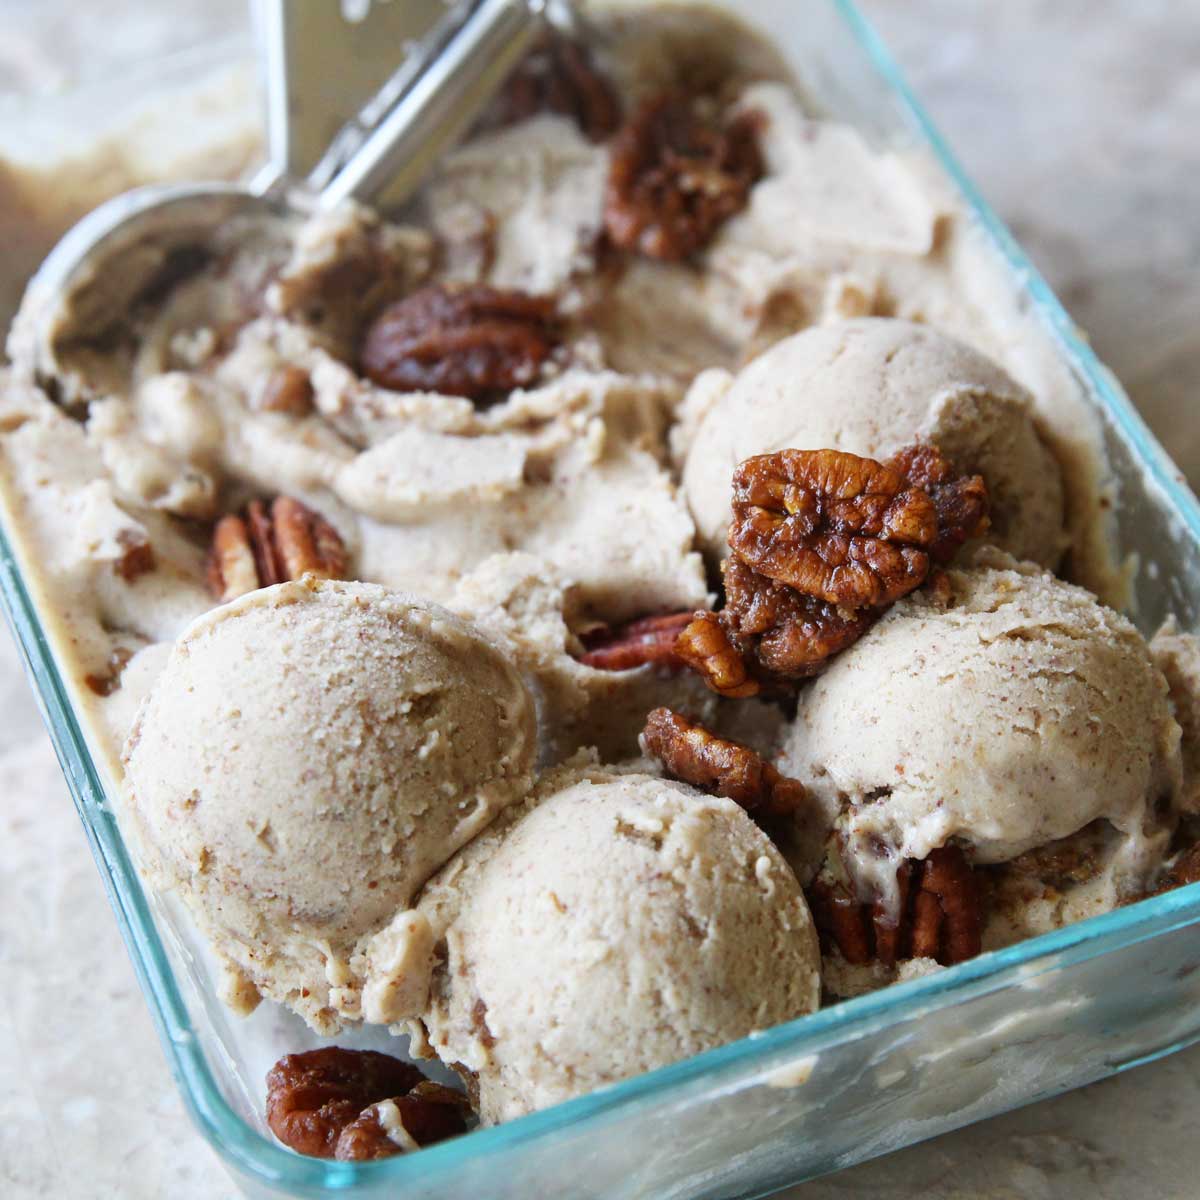 Healthy Pecan Butter Ice Cream (Made in the Food Processor) - PB Fit Nice Cream